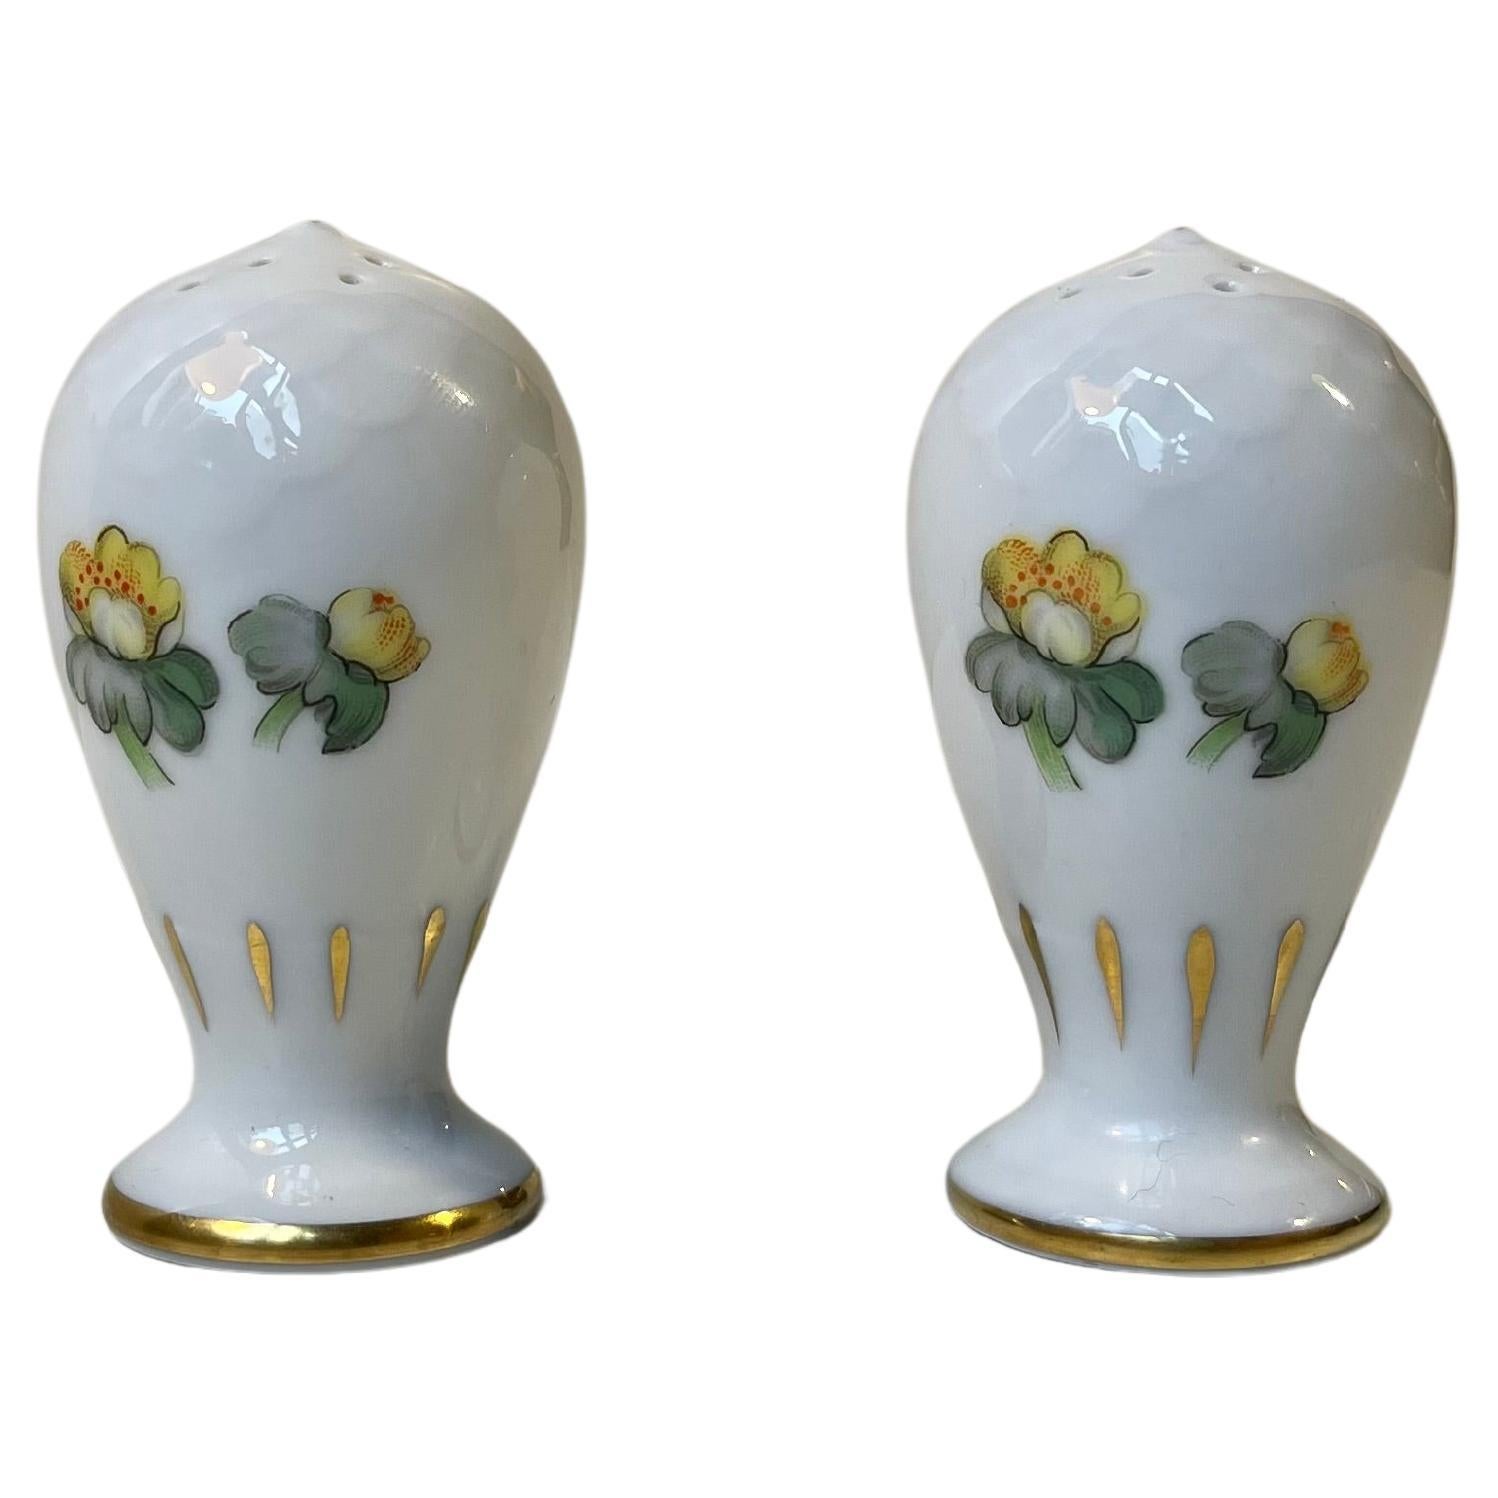 Porcelain Salt and Pepper shakers with Hand-Painted Errants by Bing & Grondahl 